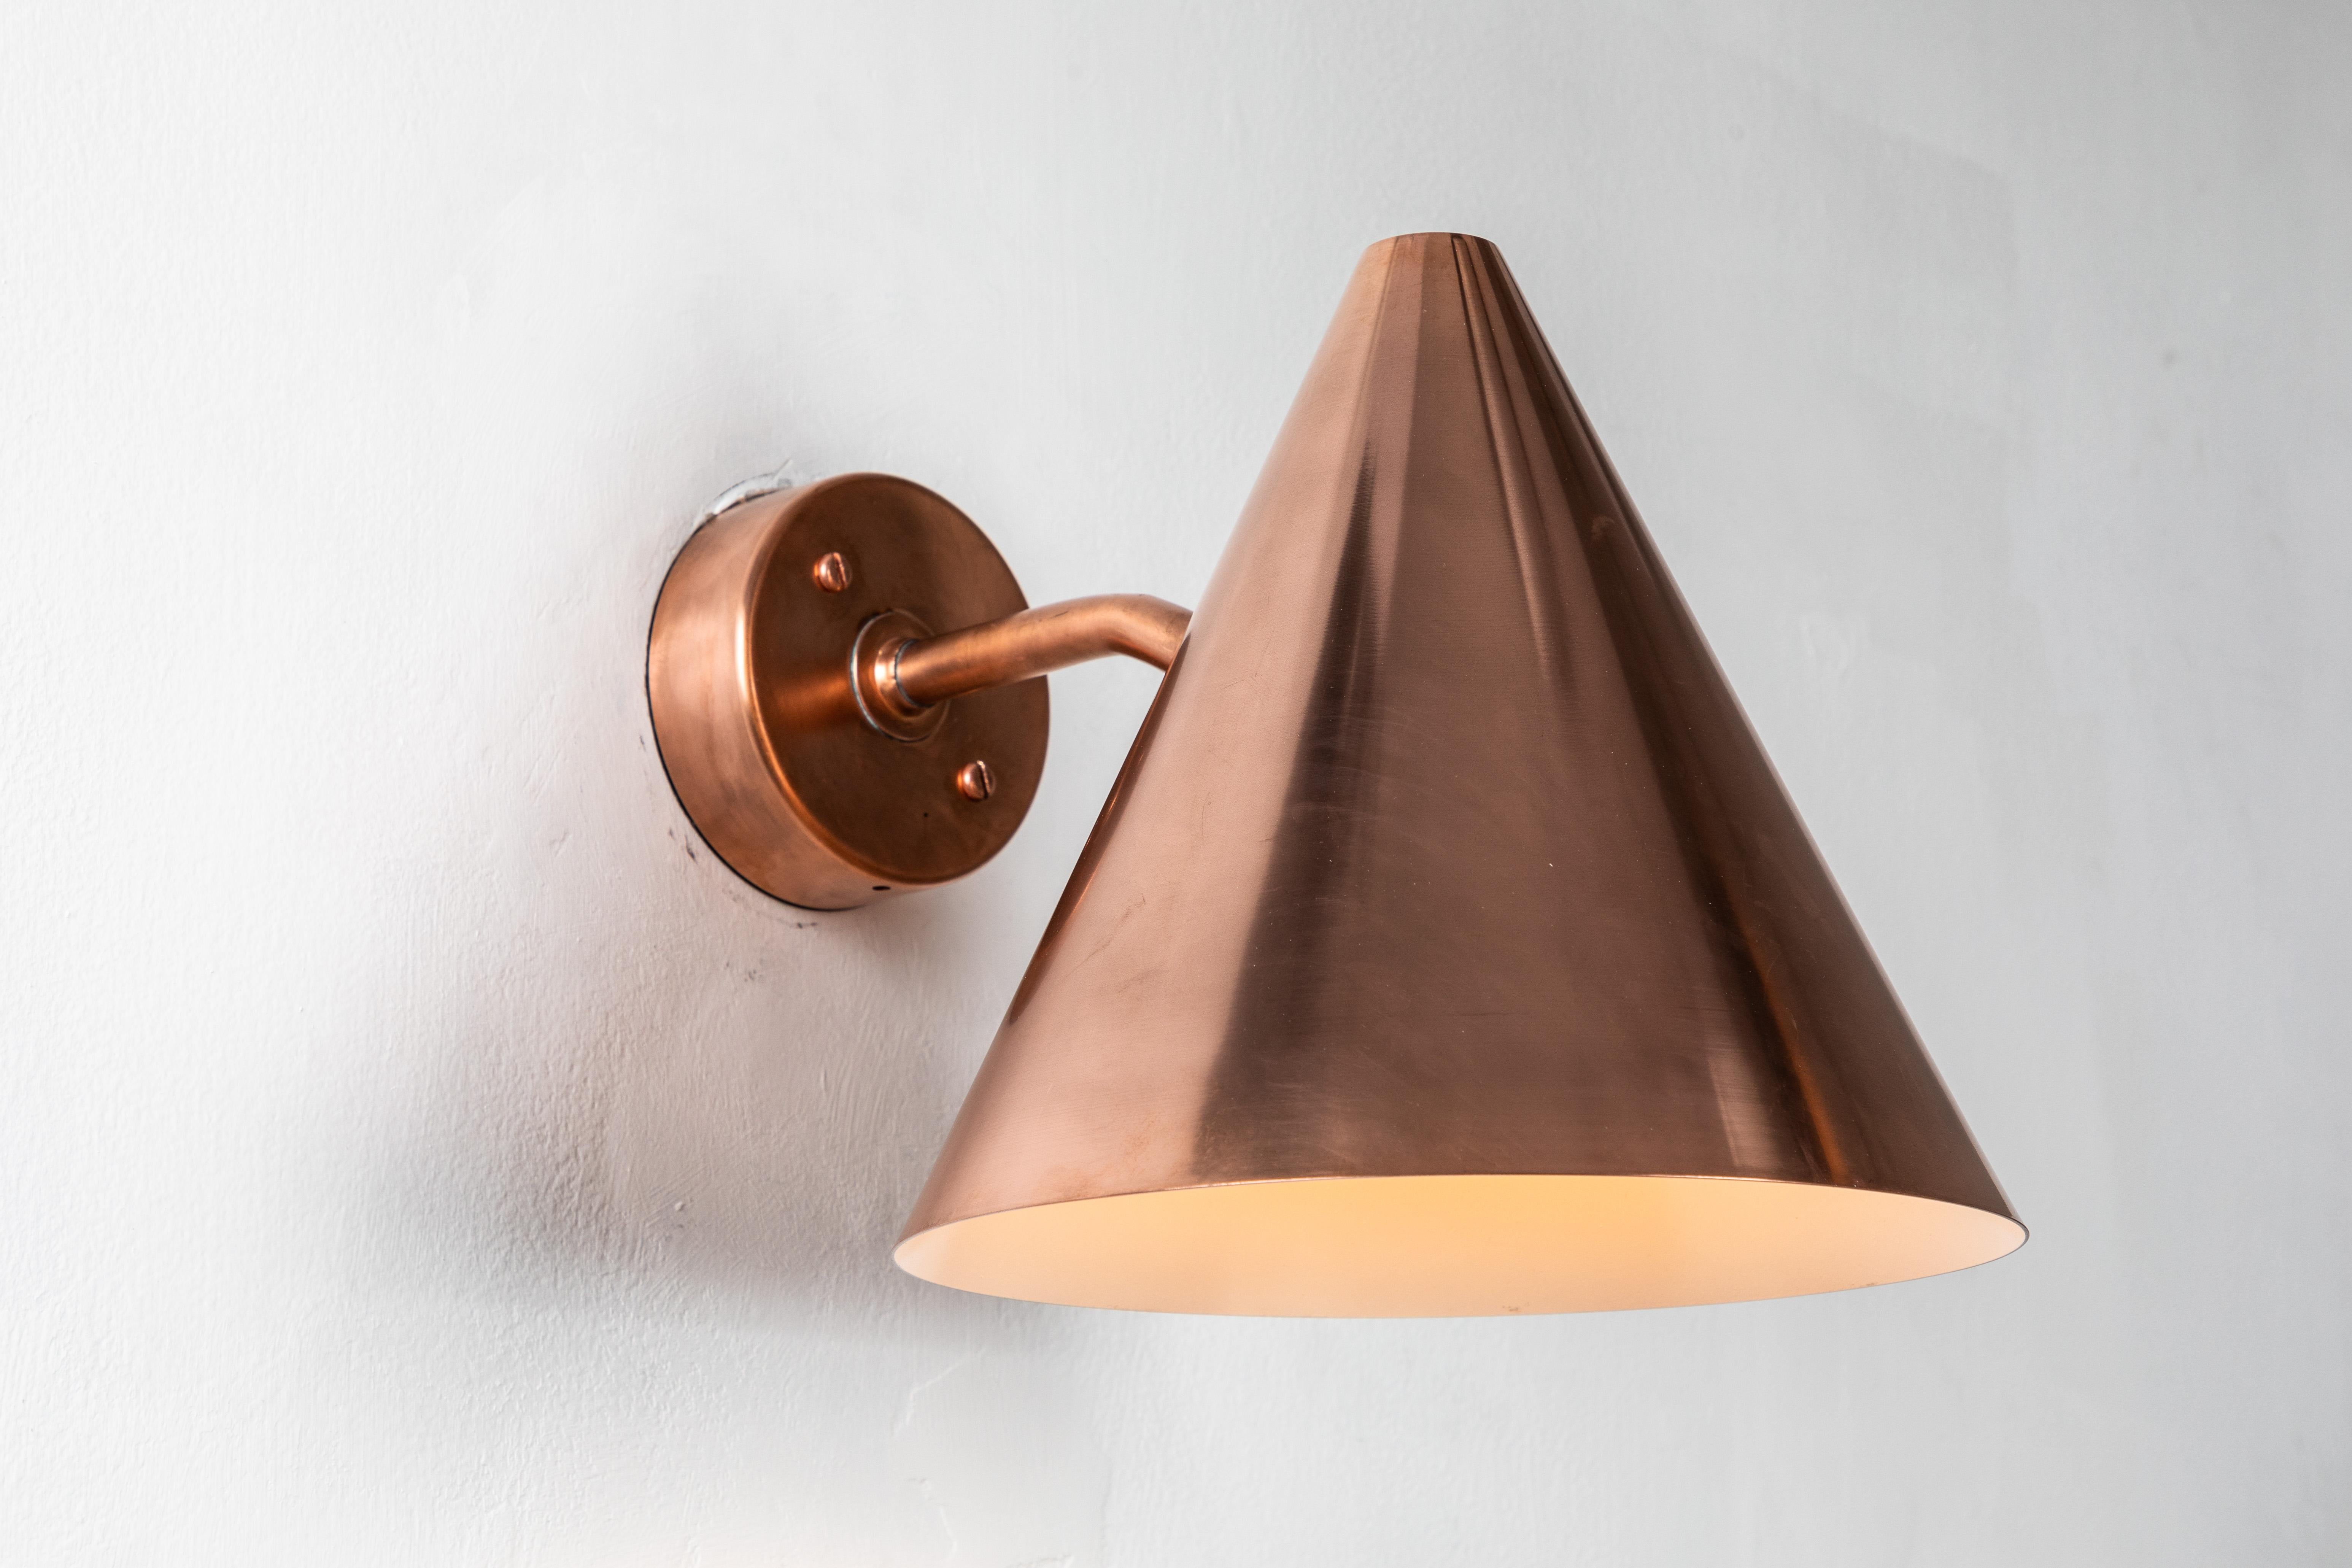 Hans-Agne Jakobsson 'Tratten' raw copper outdoor sconce. An exclusive made for U.S. and UL listed authorized re-edition of the classic Swedish design executed in raw unlacquered polished copper with white painted interior. Suitable for both outdoor